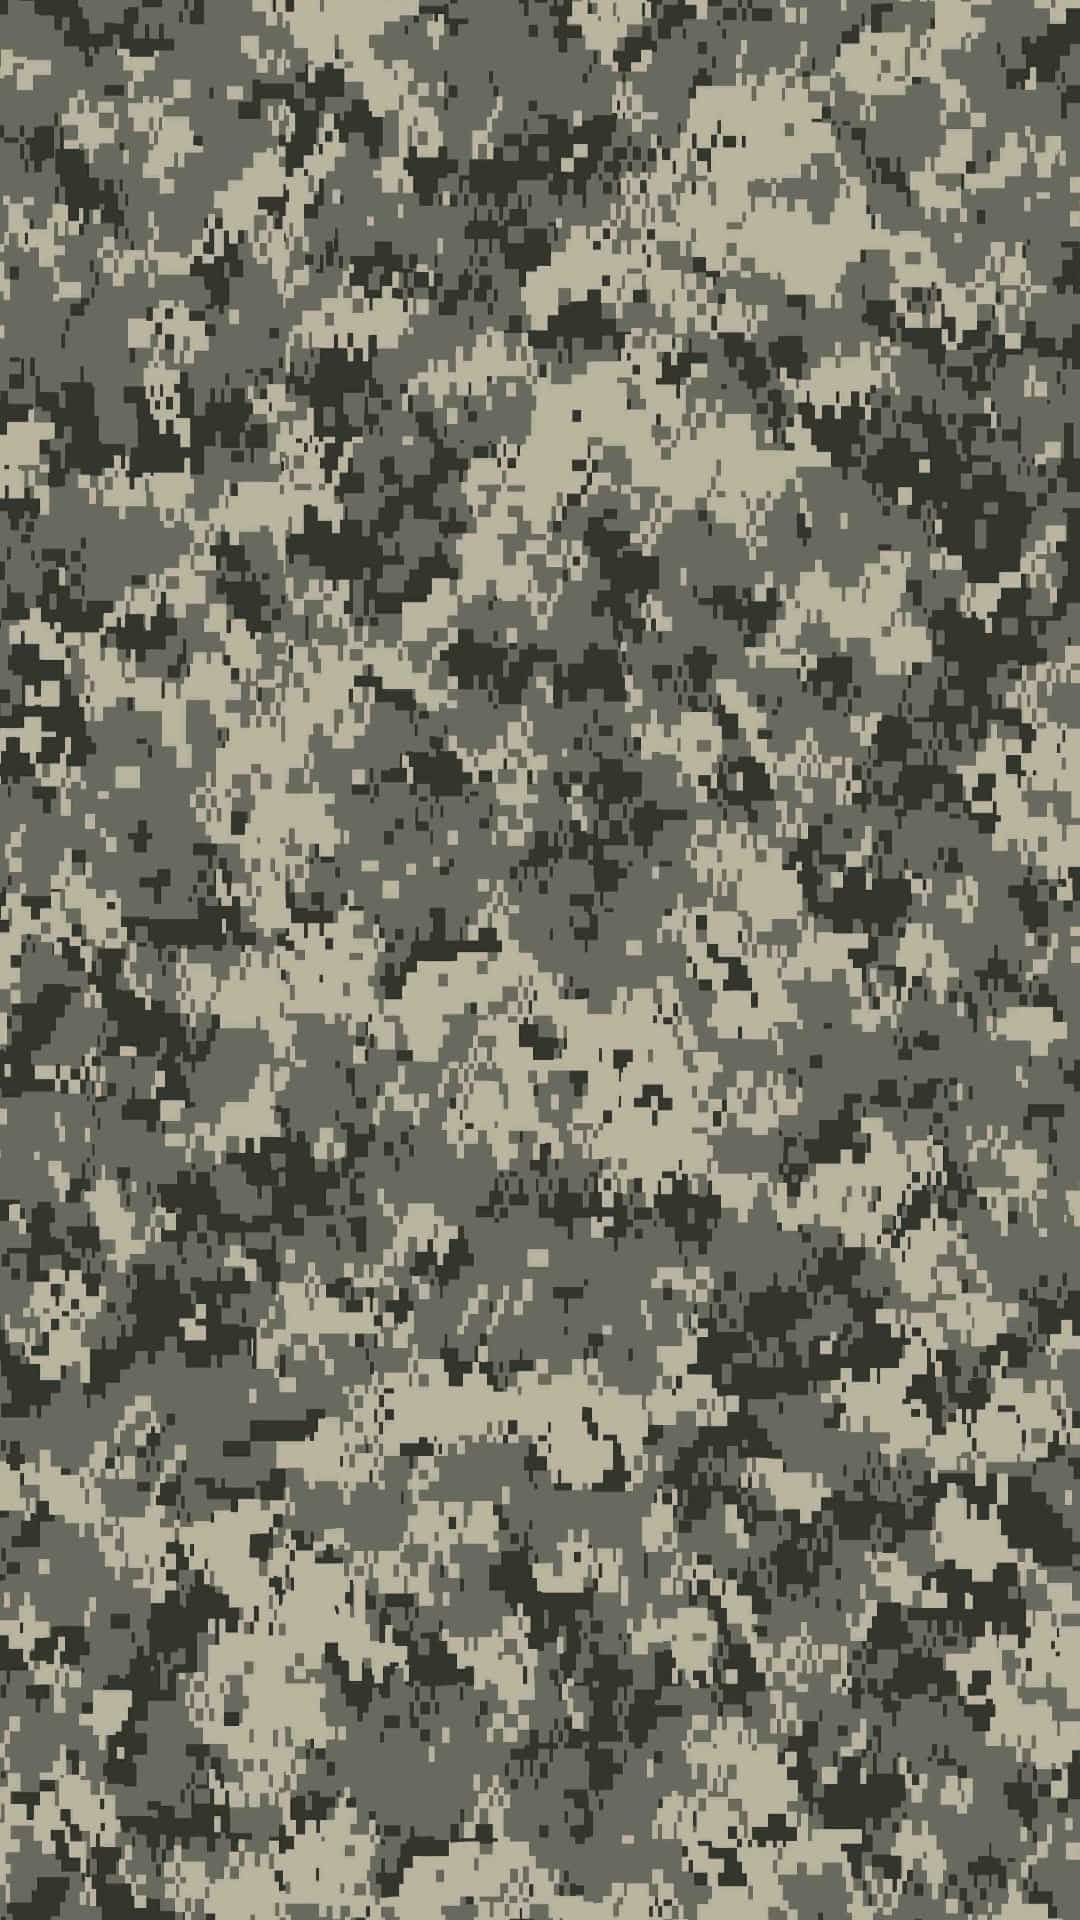 Digital camouflage wallpaper. CamouflageArmyMemories